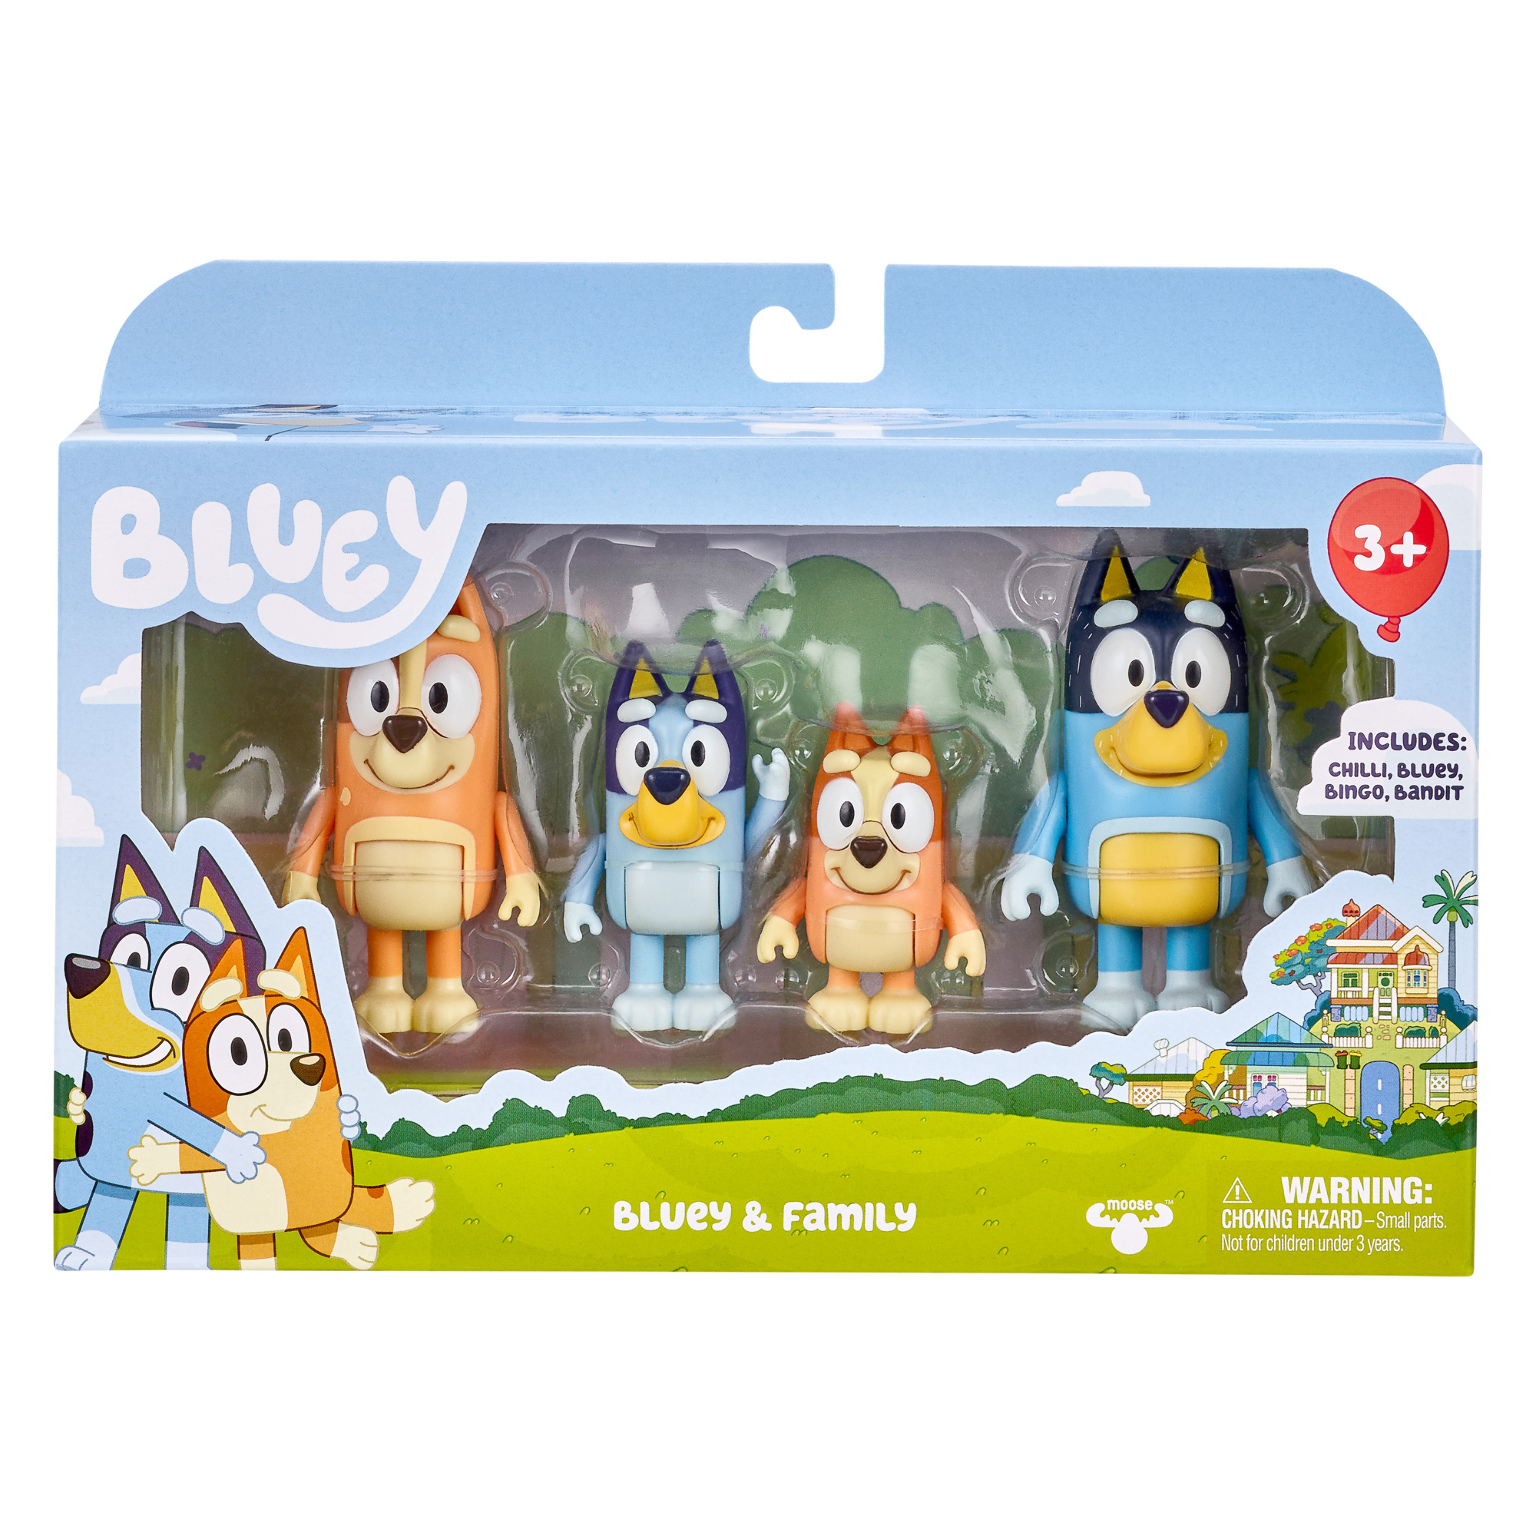 Purchase Wholesale bluey christmas. Free Returns & Net 60 Terms on